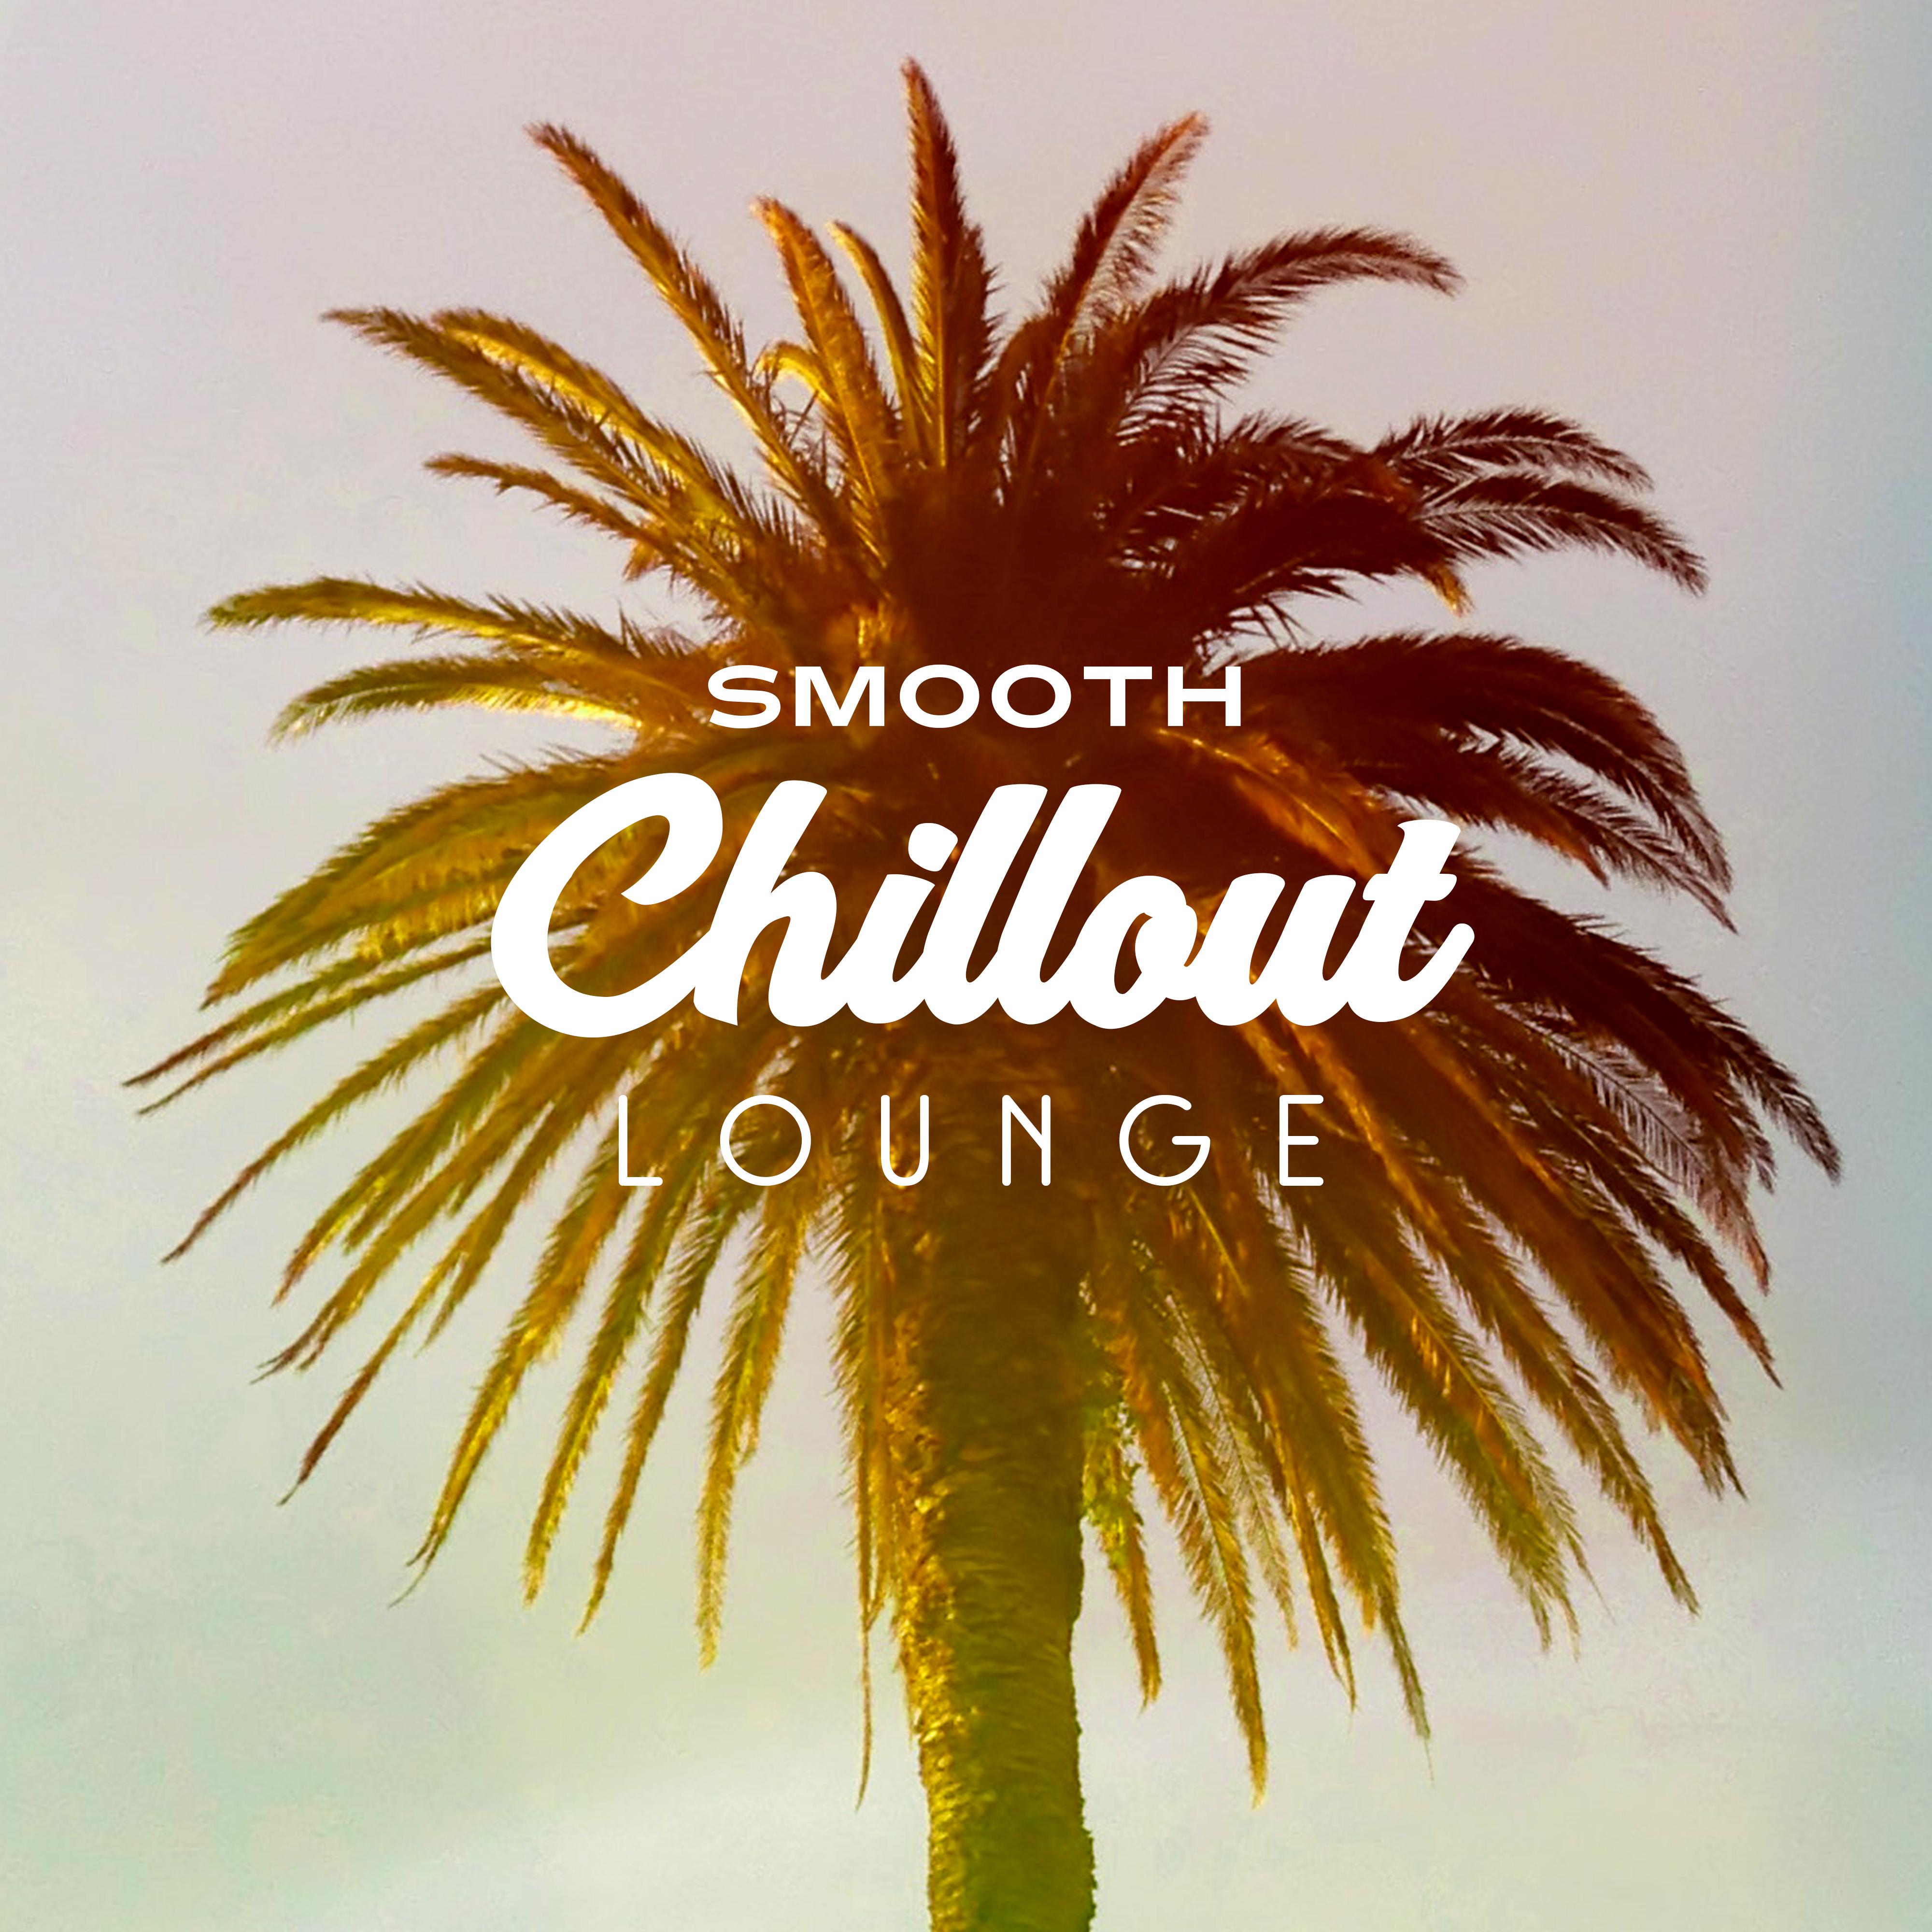 Hot Chillout